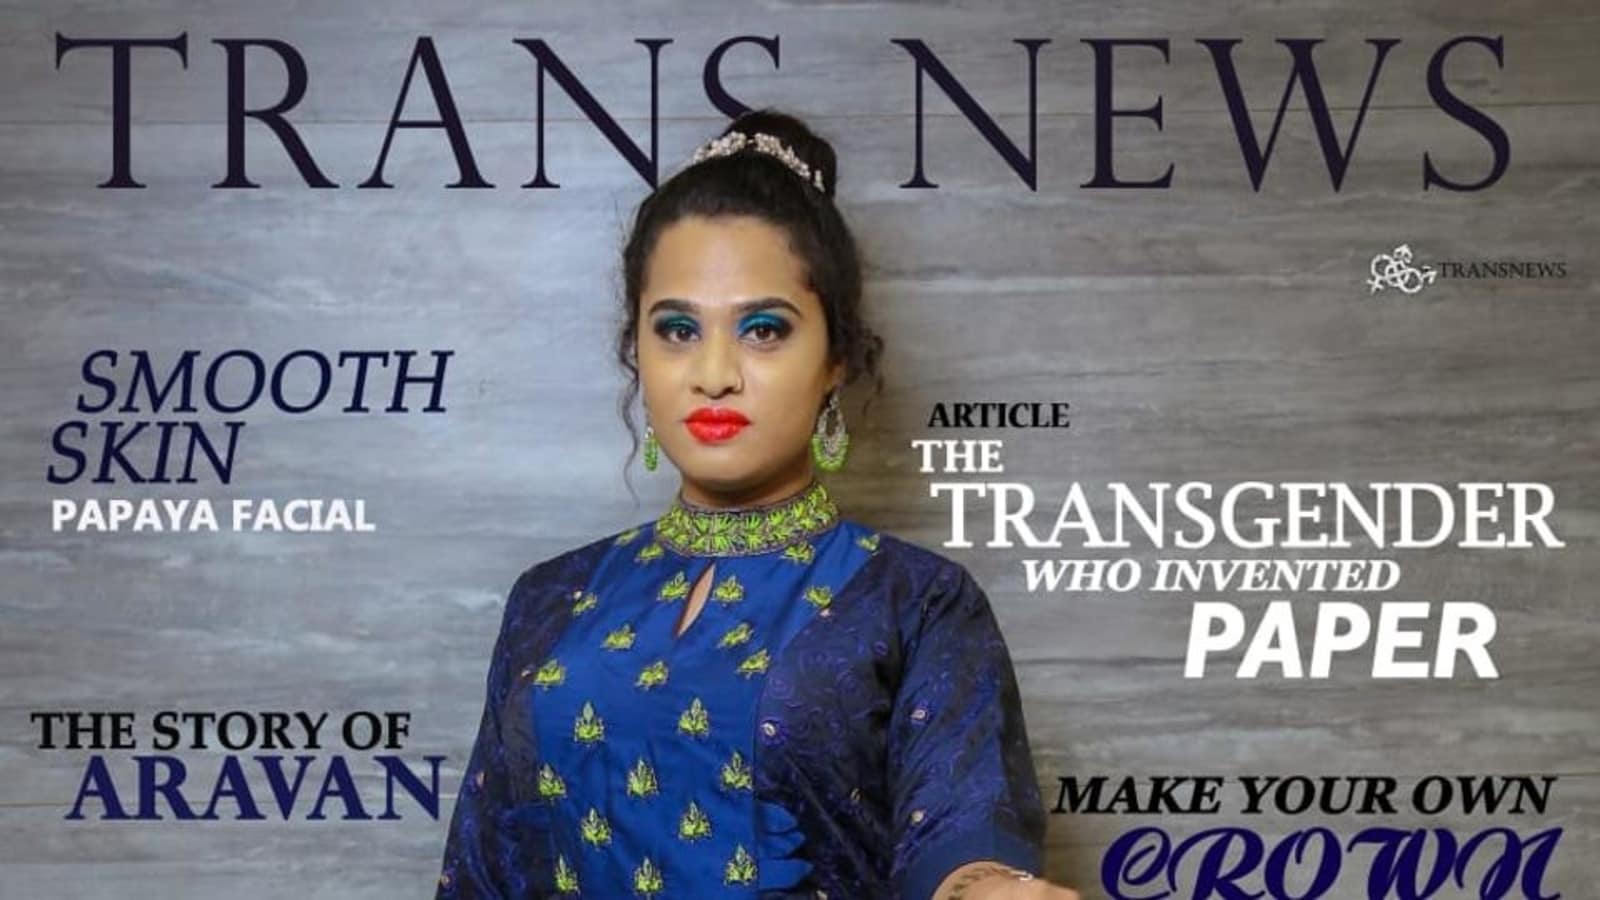 Queer eye There’s a new trans news magazine in Madurai Hindustan Times